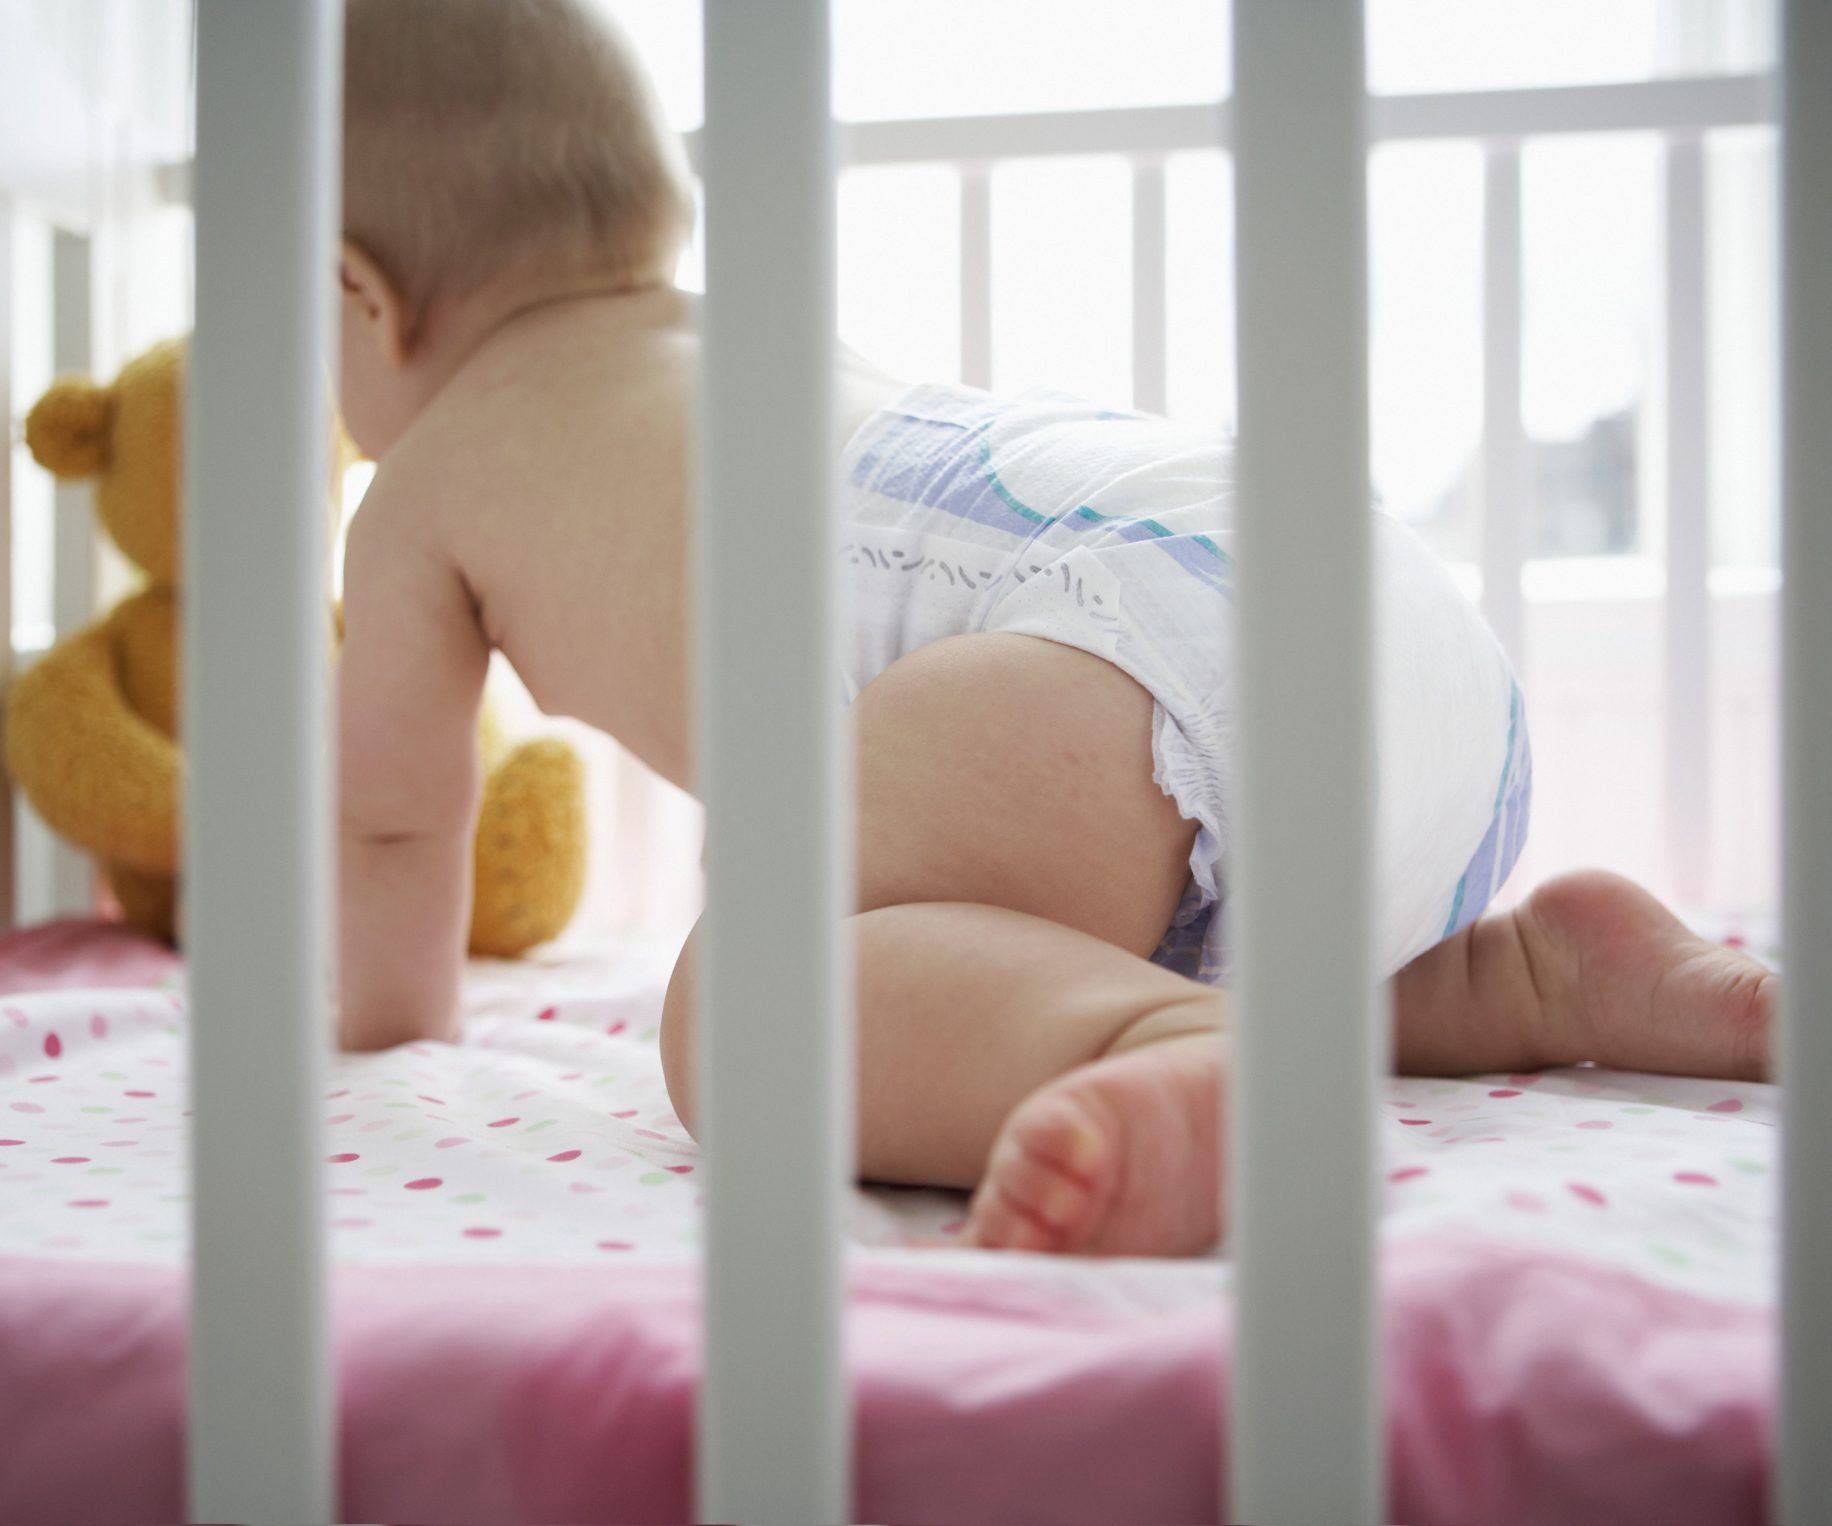 Three popular cot mattresses found to not be SIDS safe